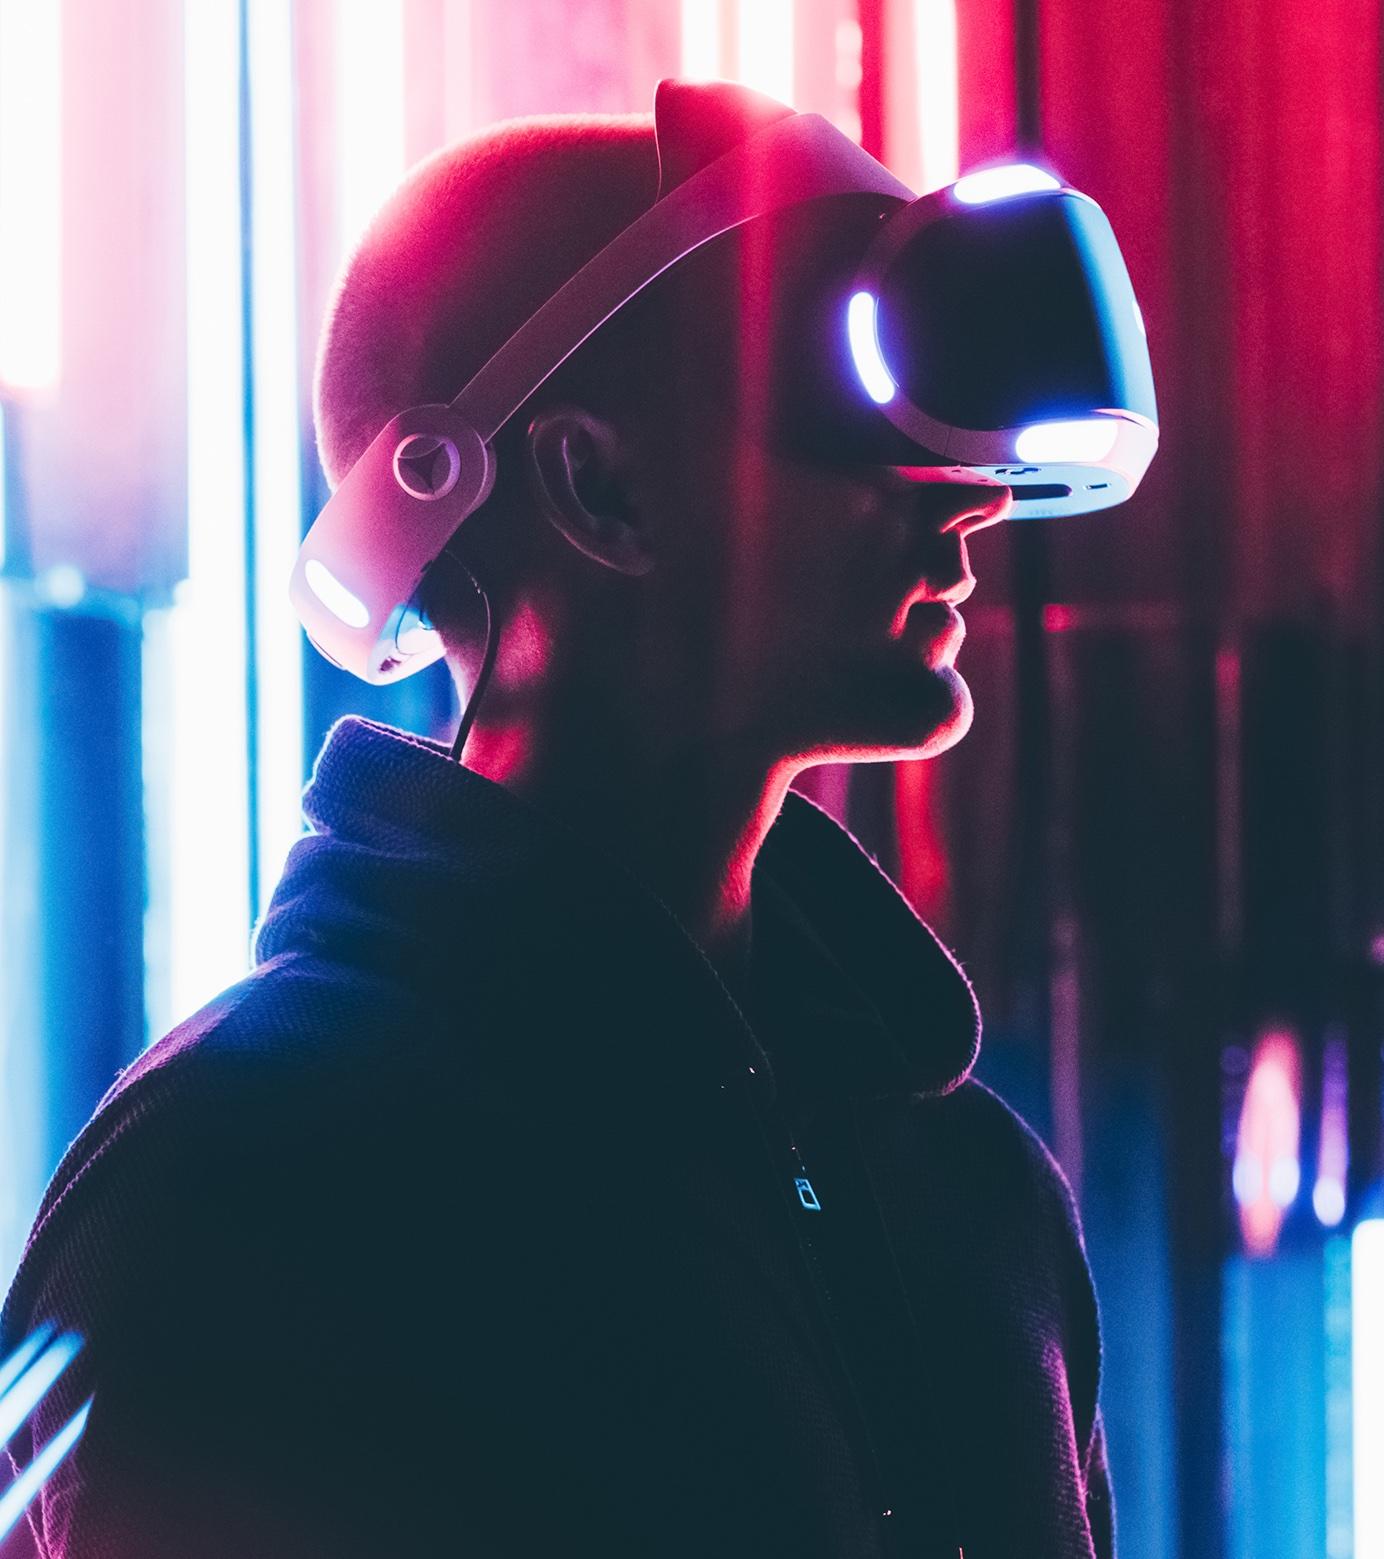 an image of a person wearing a virtual reality headset